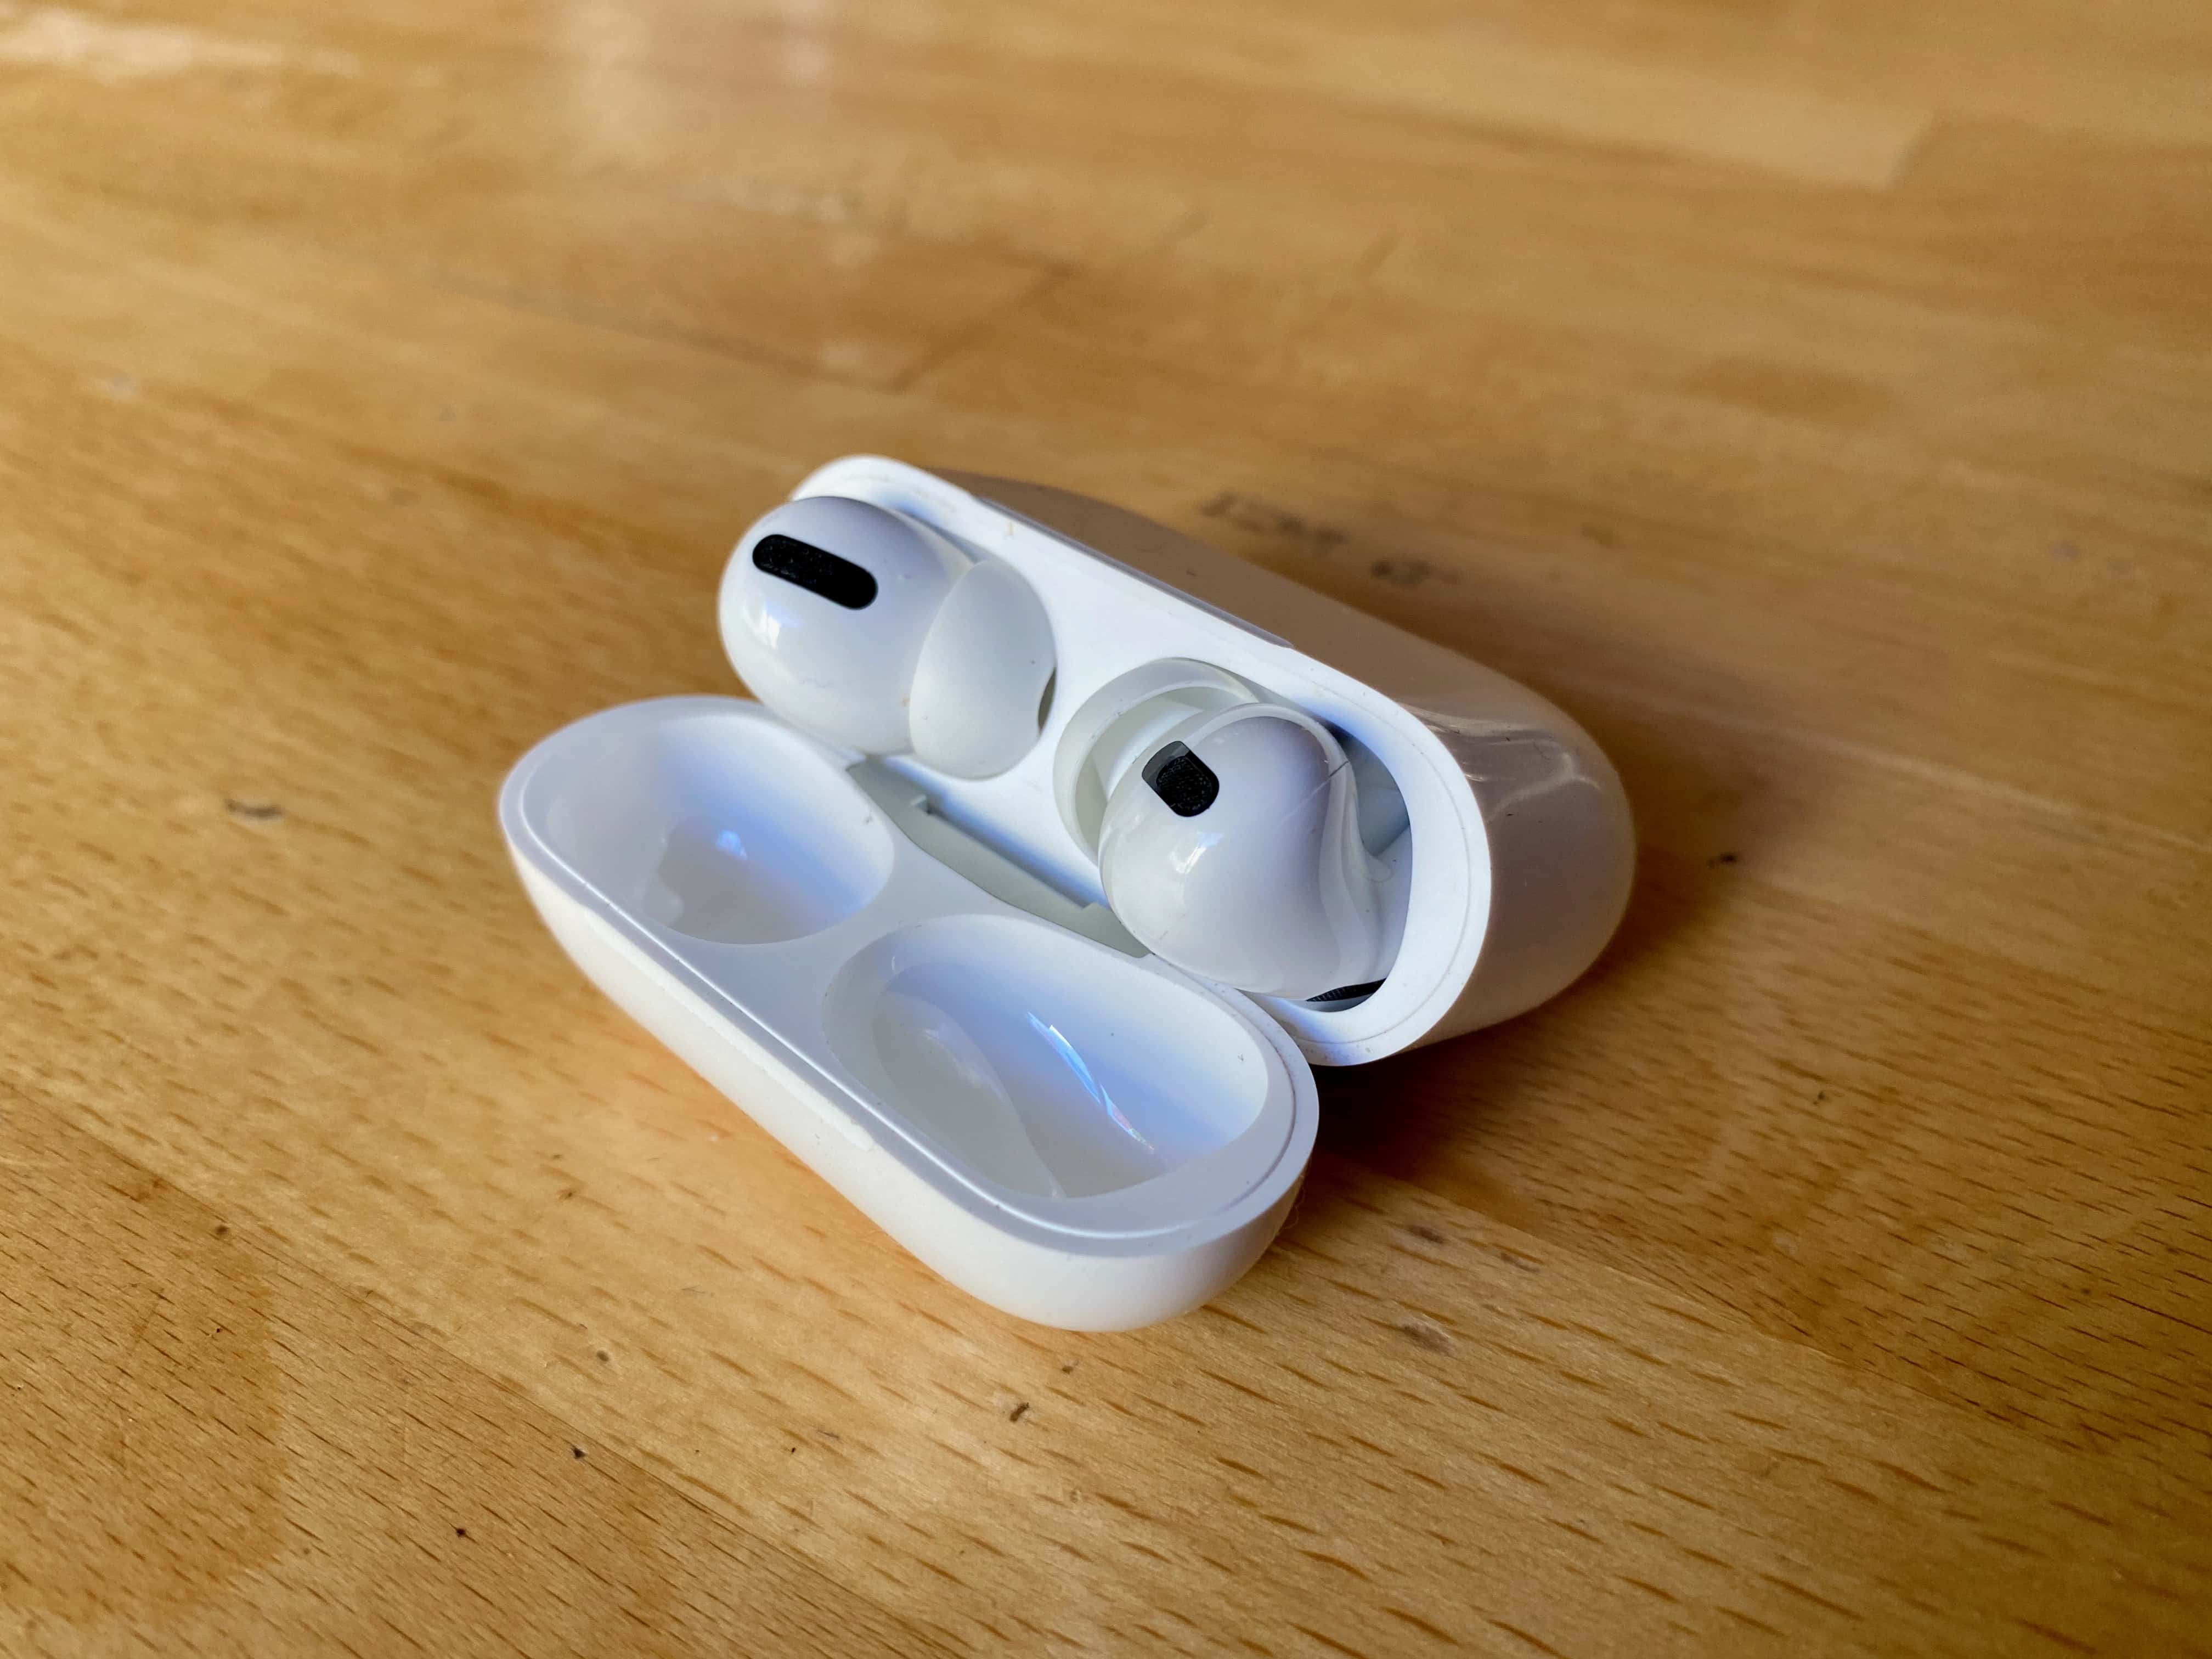 The AirPods Pro case is slightly bigger than the original